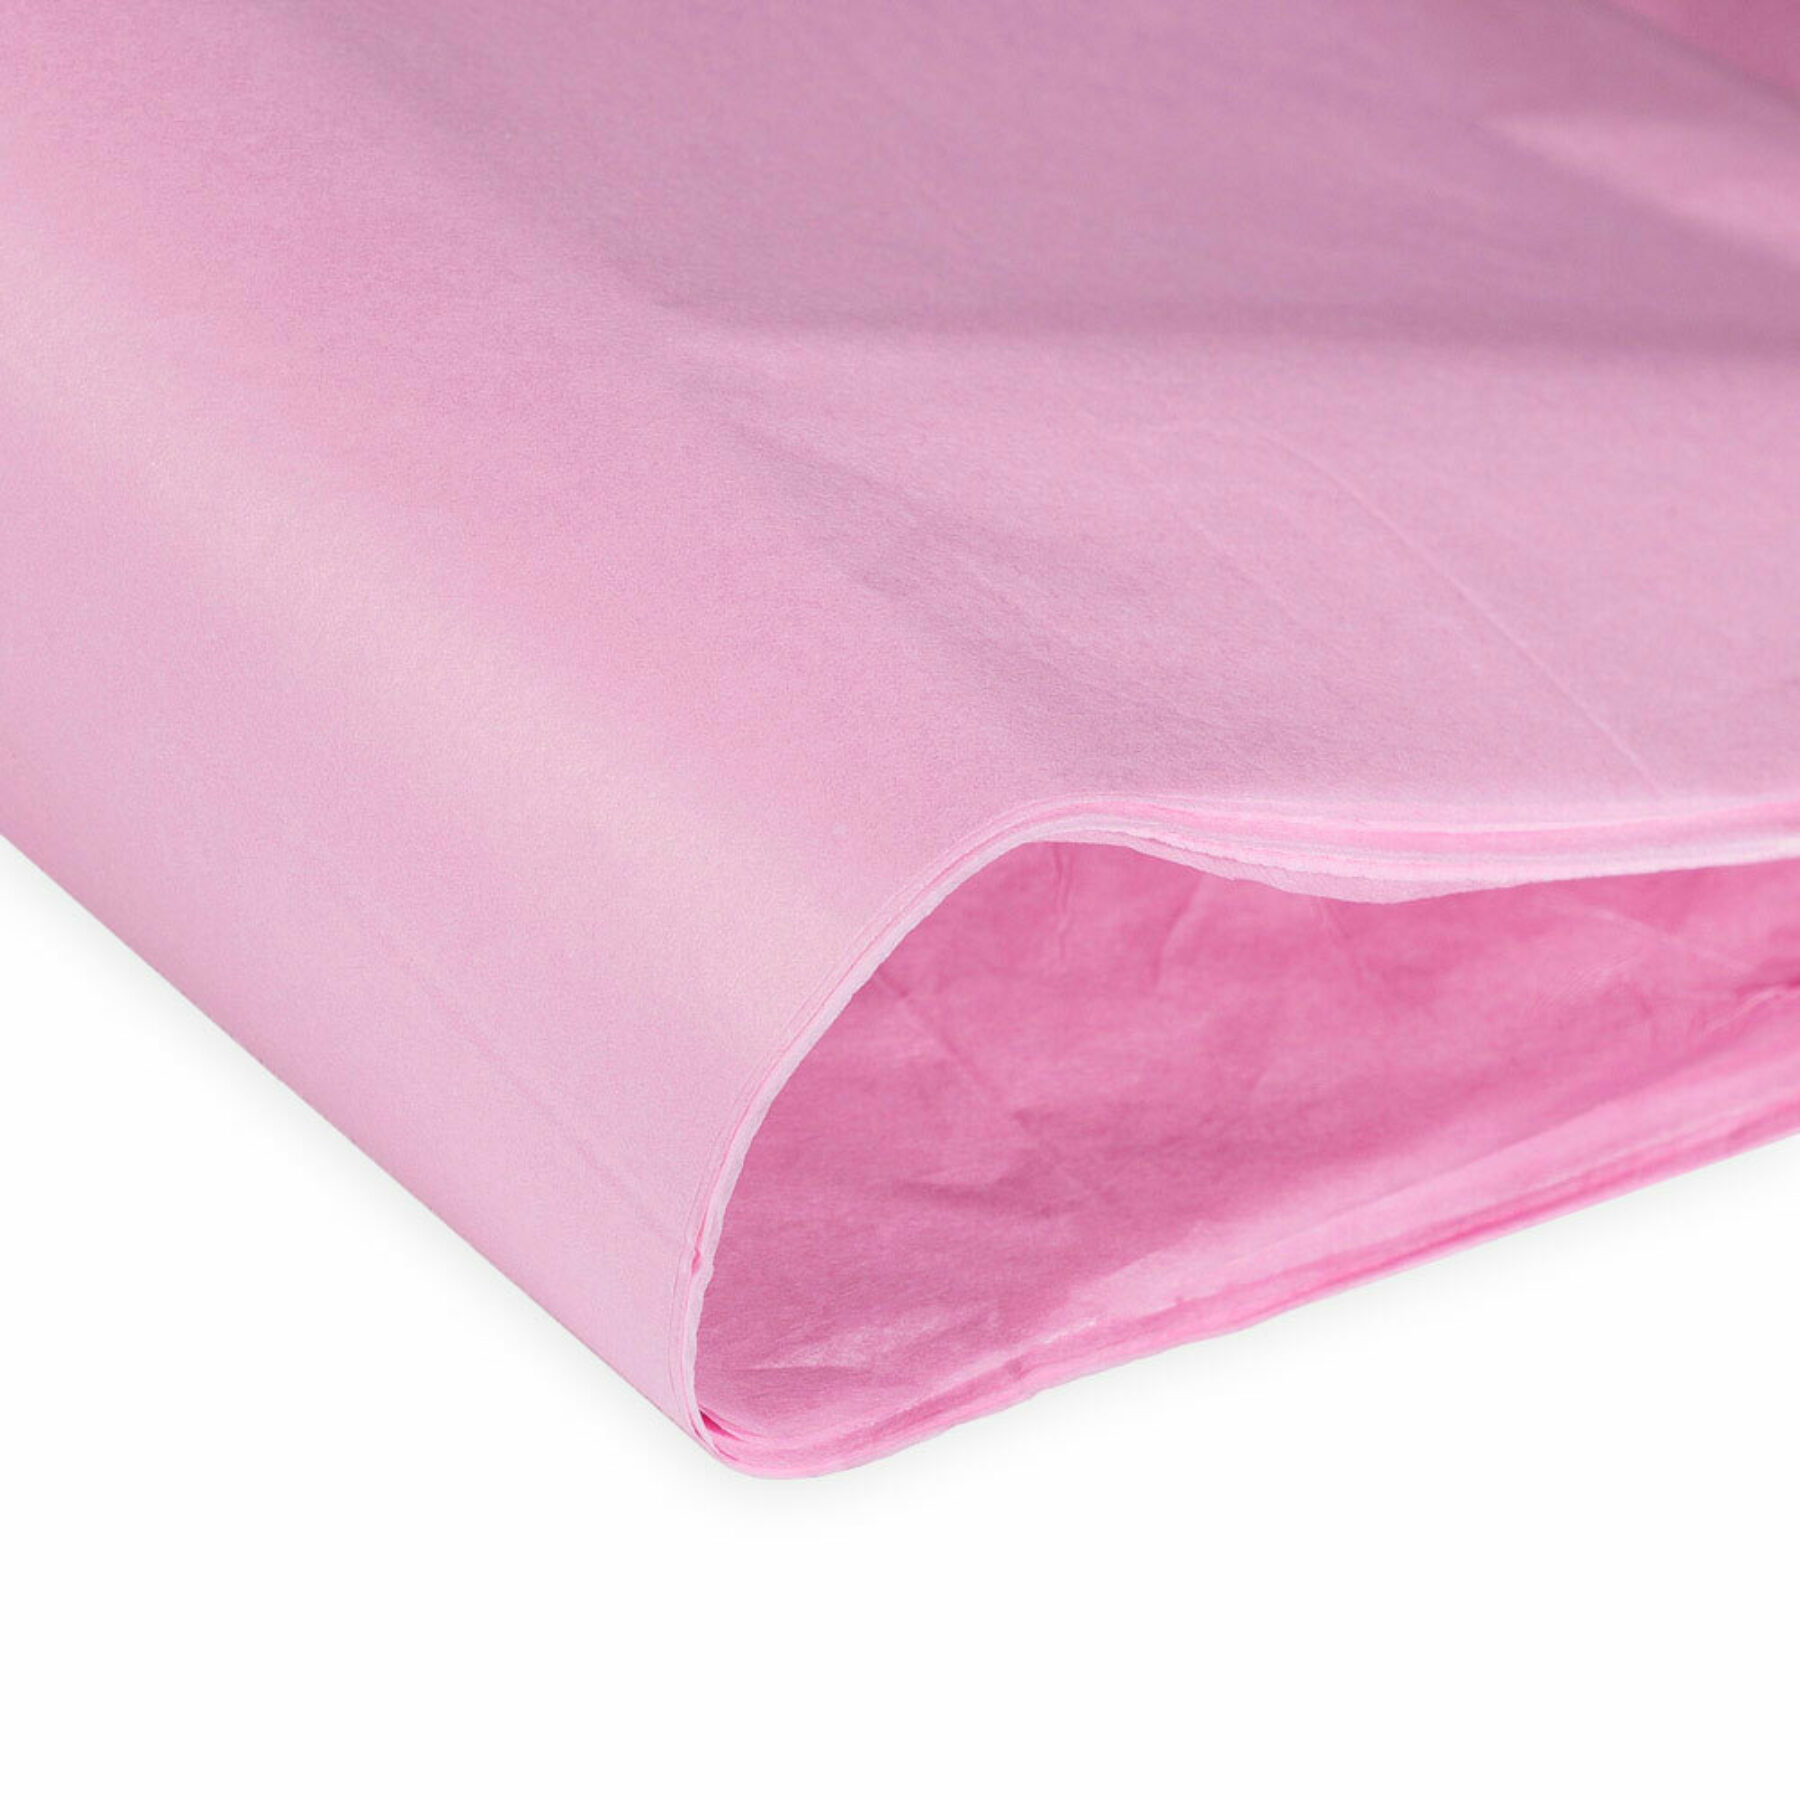 Pink Tissue Paper (480 sheets)